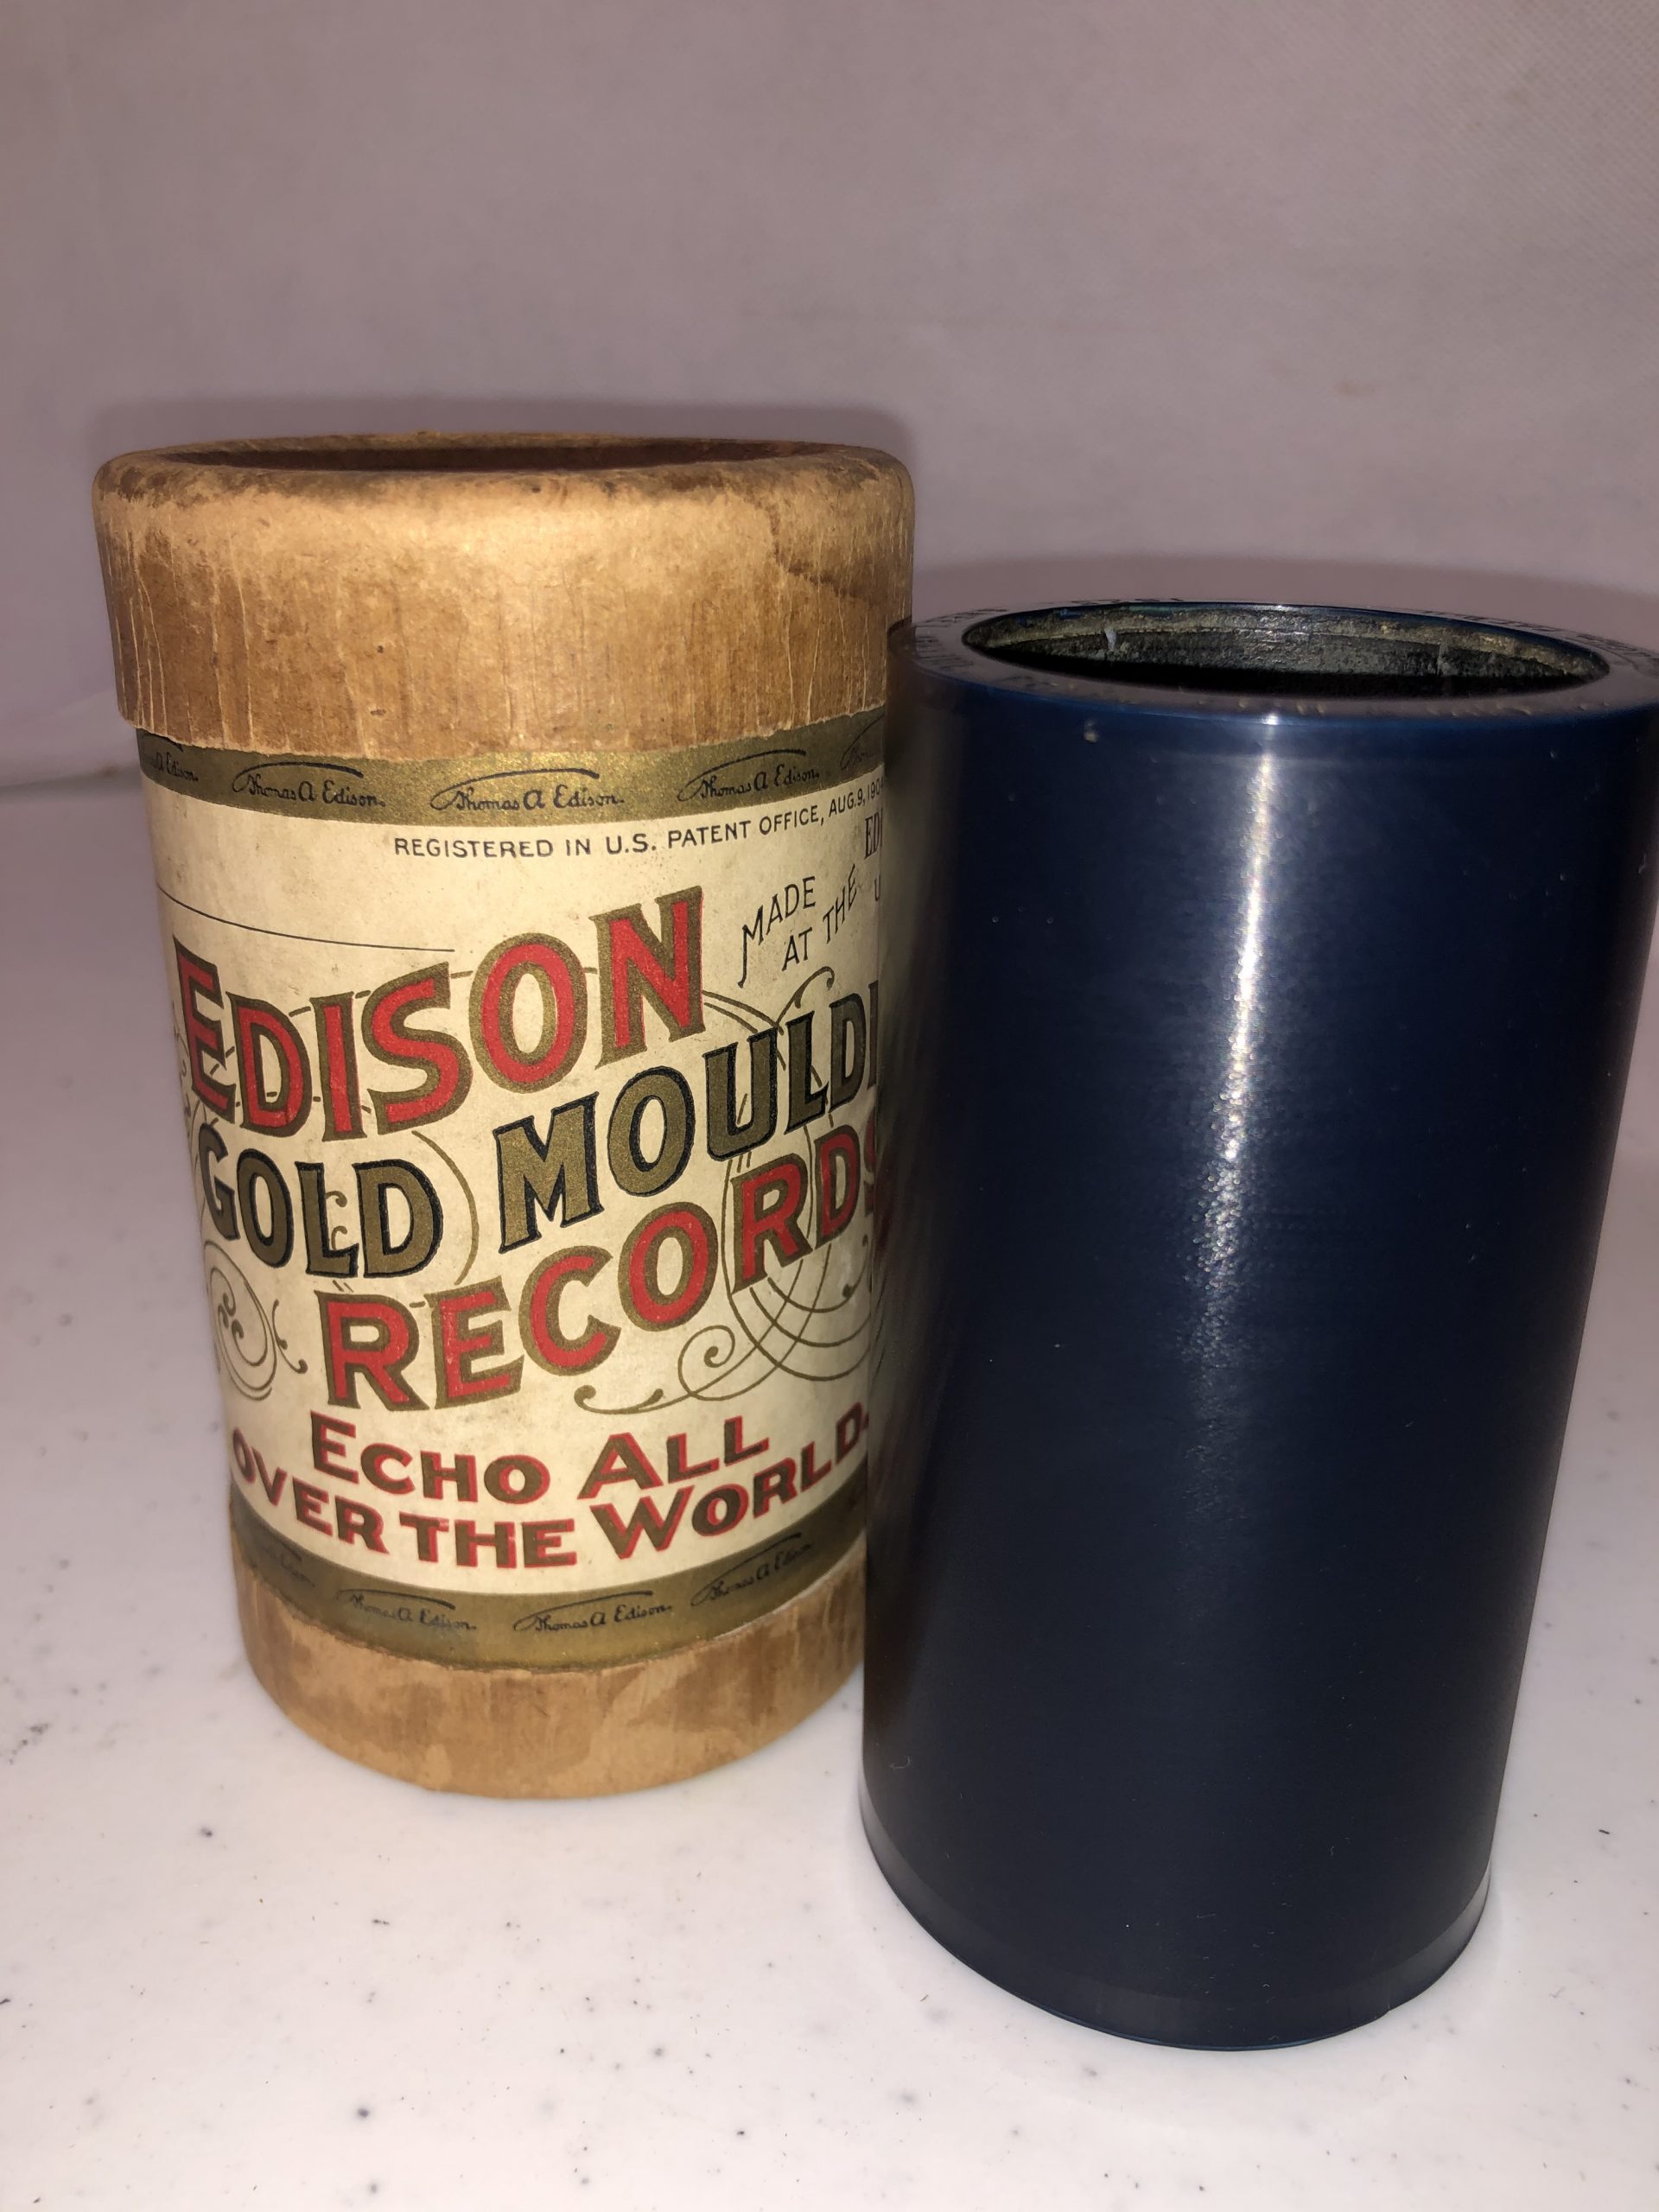 Edison 4 minute Cylinder…”Annie Laurie” (Home Sweet Home)